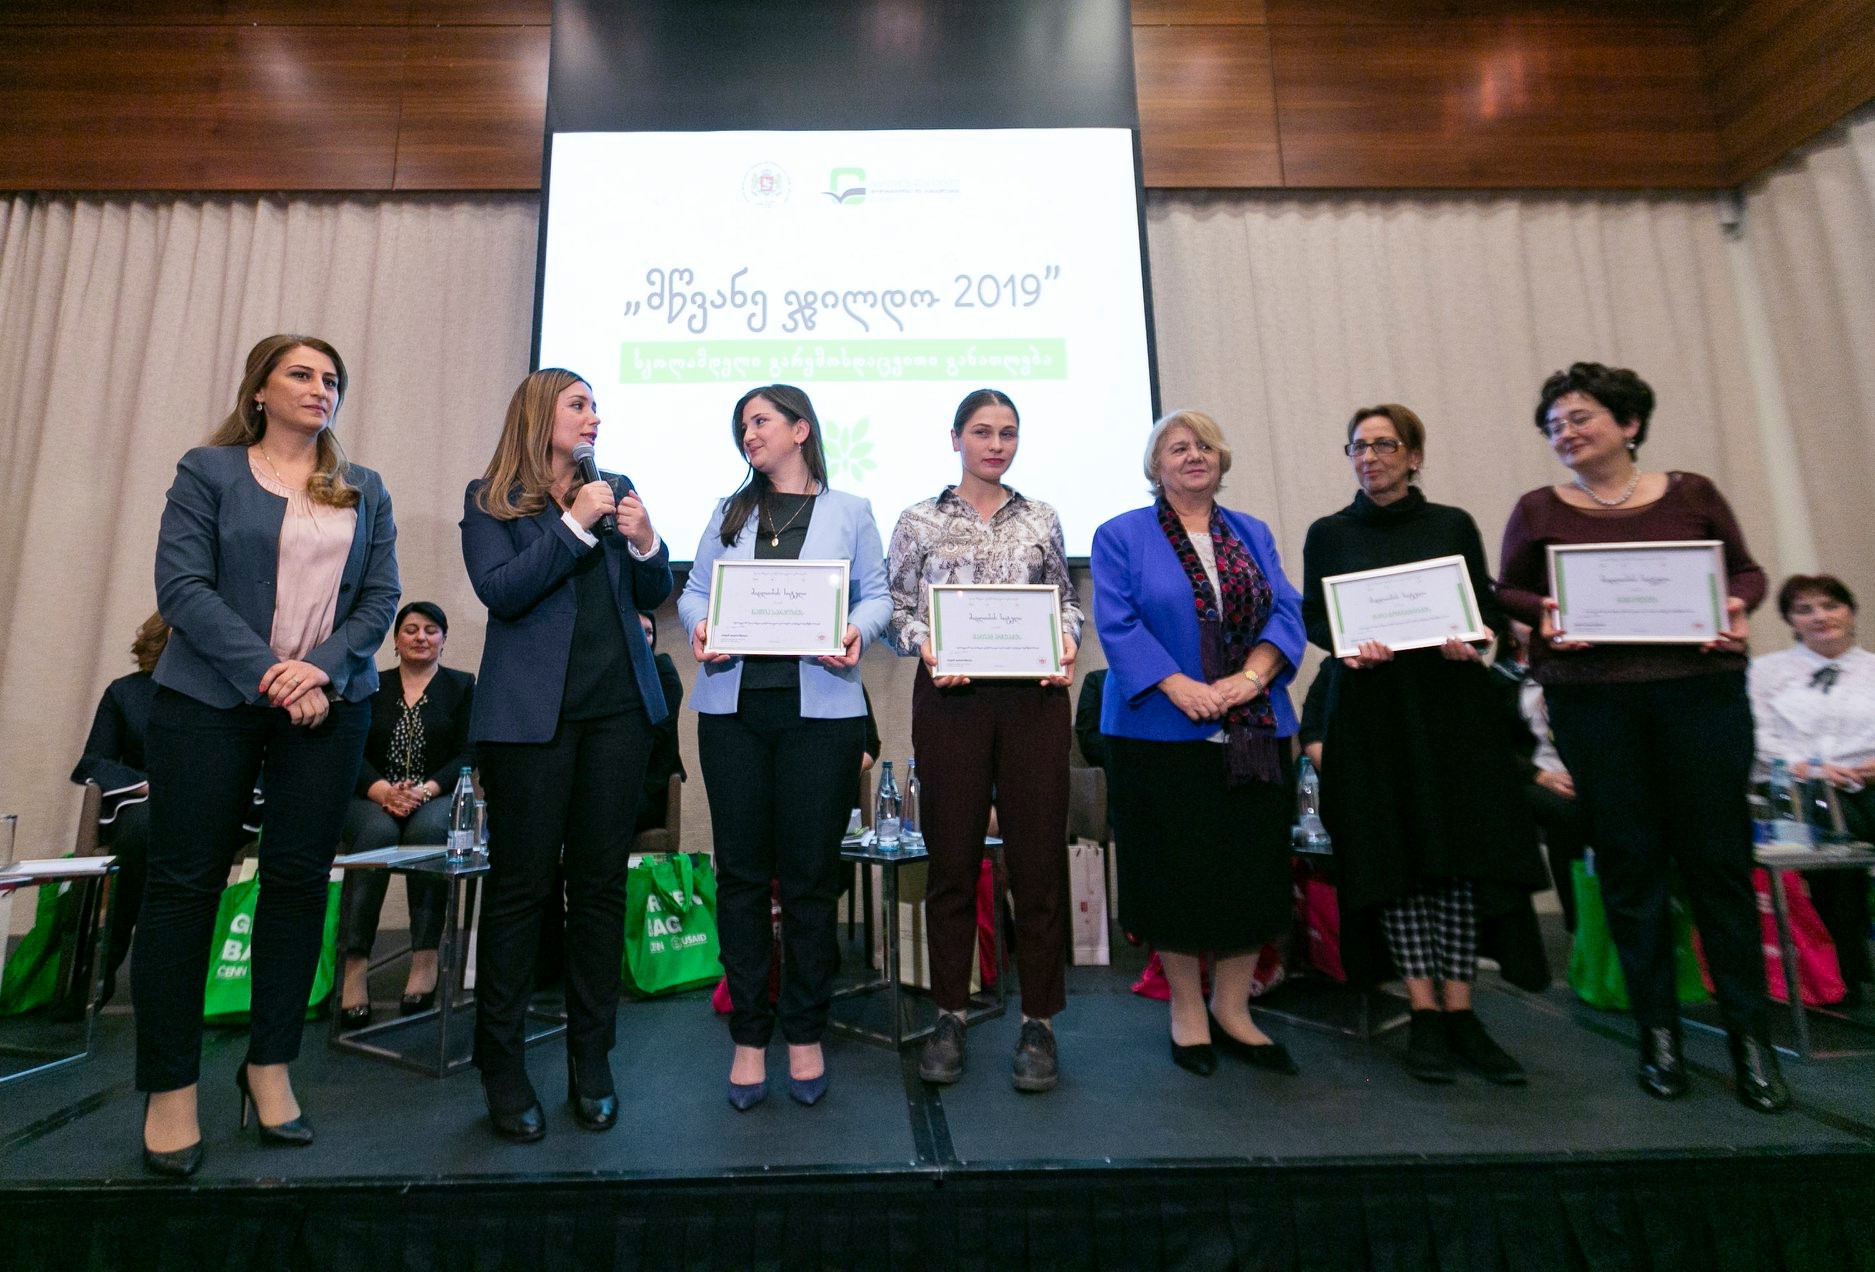 Awarding the winners of the "Green Award" contest